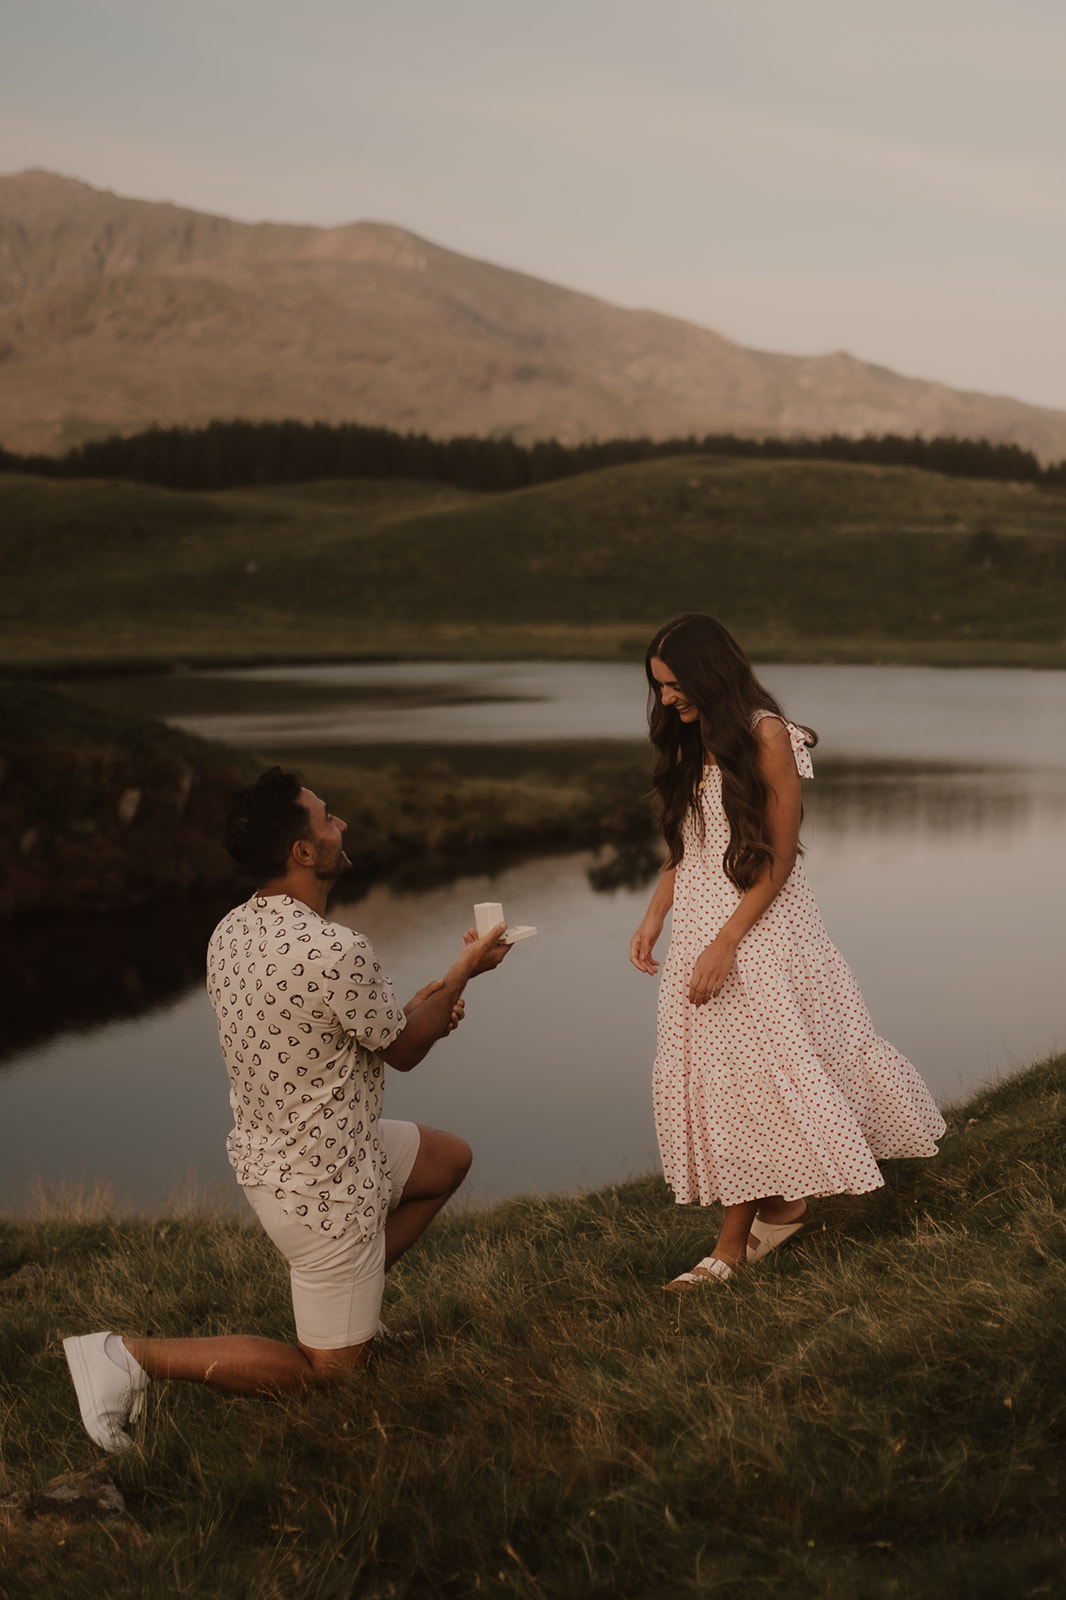 Proposal planner and photographer in North Wales